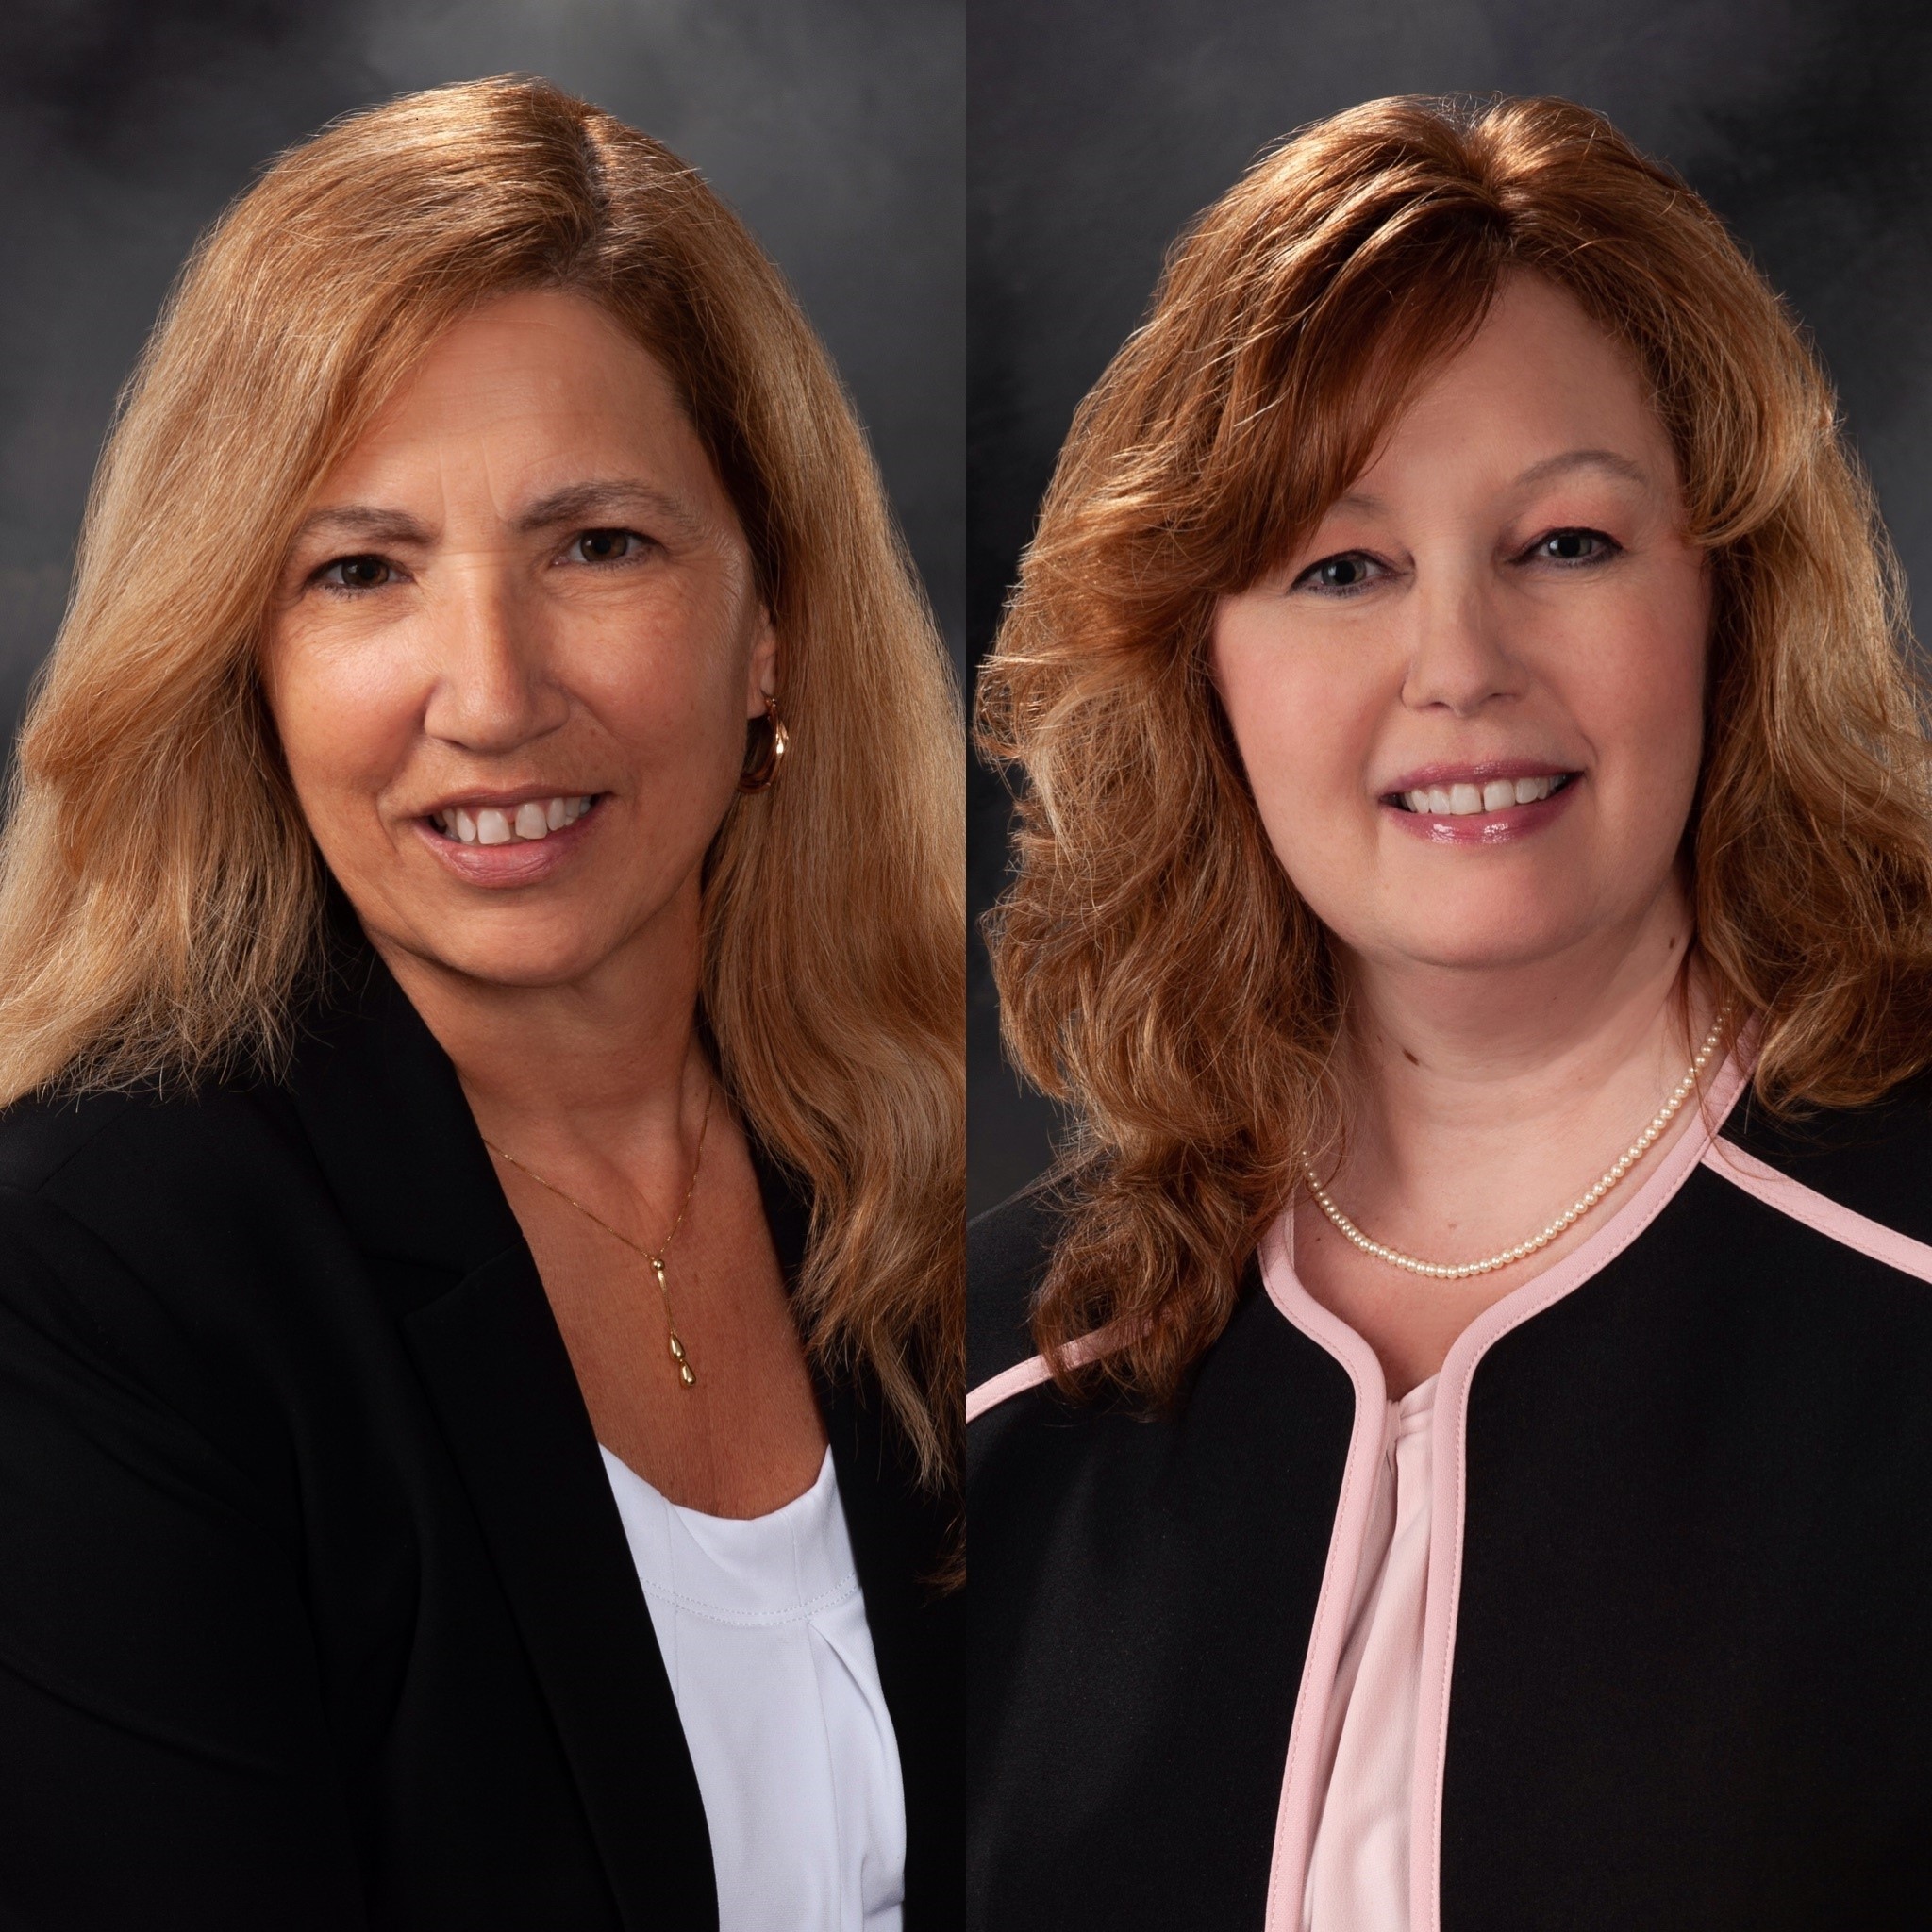 Headshots of Christine Penn and Jennifer S. Leon from The Tampa Bay Trust Company